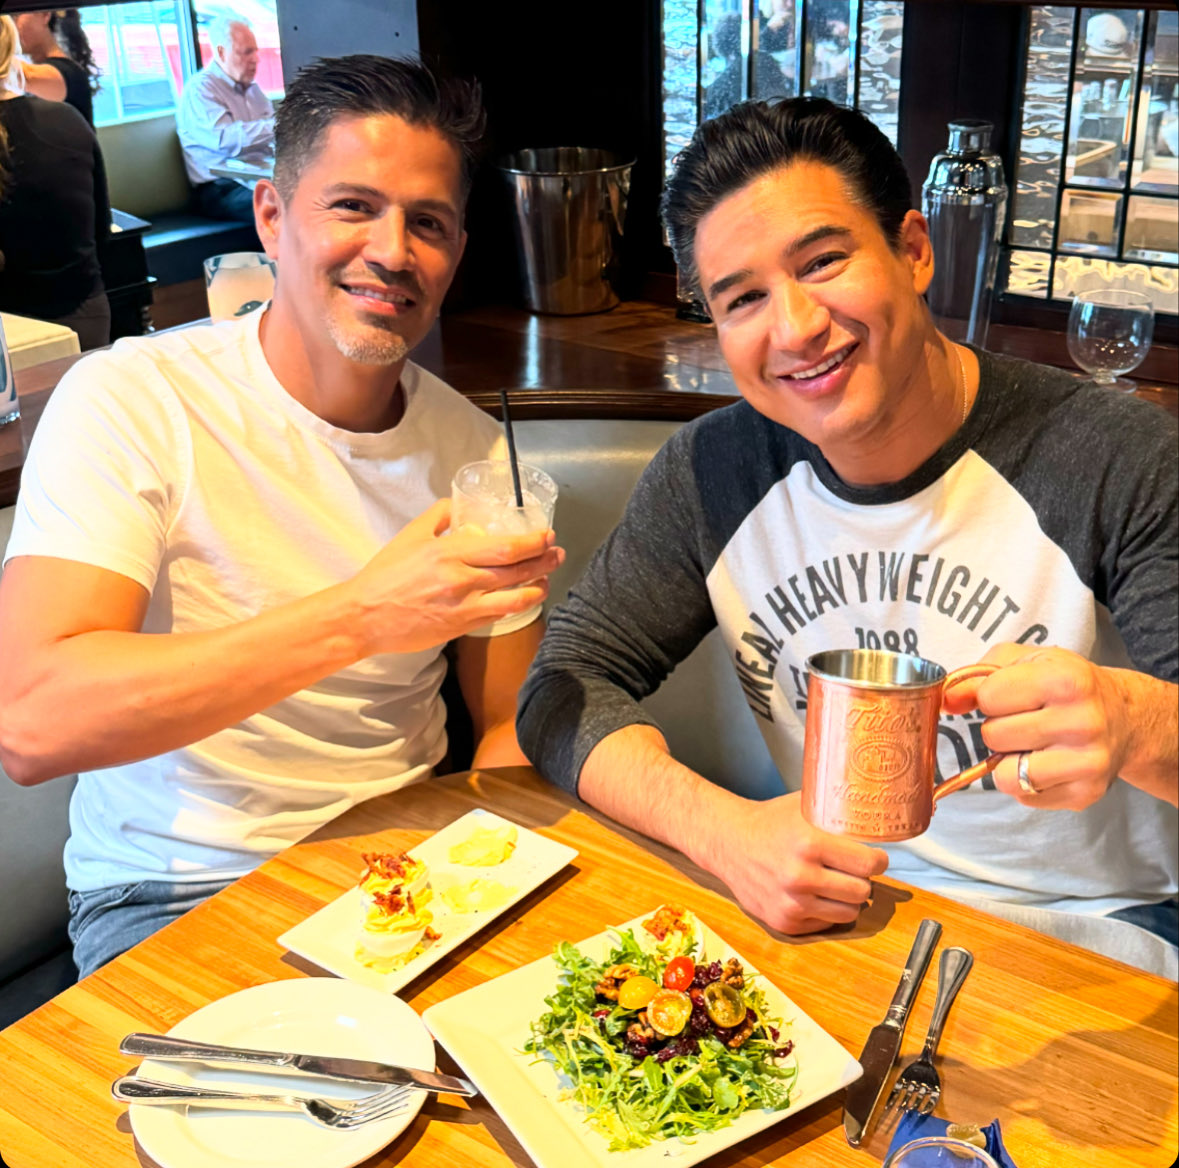 Good catching up with my boy Jay last night over some drinks& a bite!

#Homies  #TalkingShop